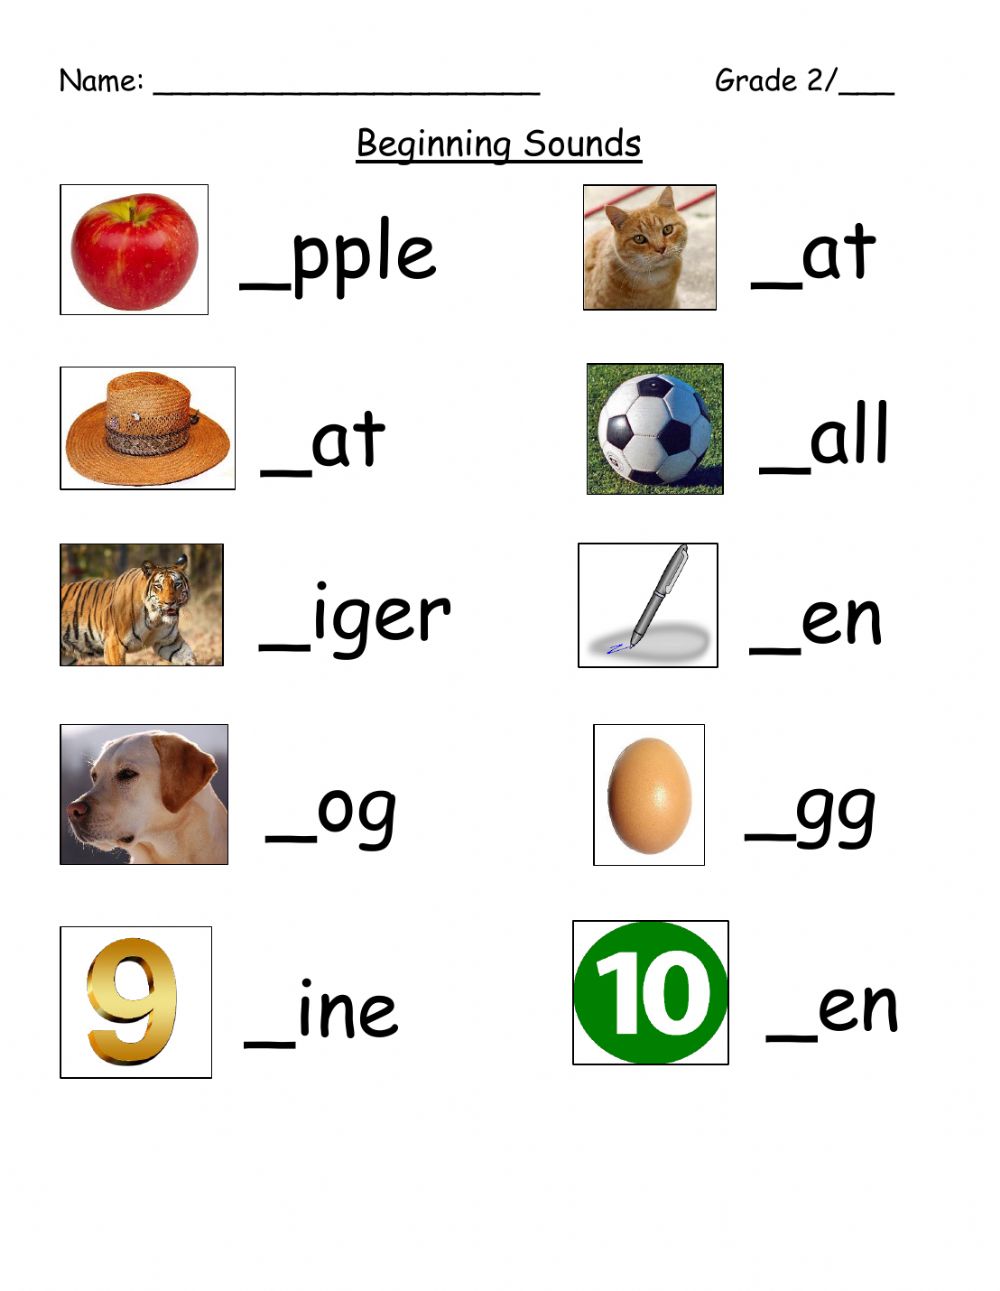 k5-beginning-sounds-m-n-and-o-lesson-questions-answers-for